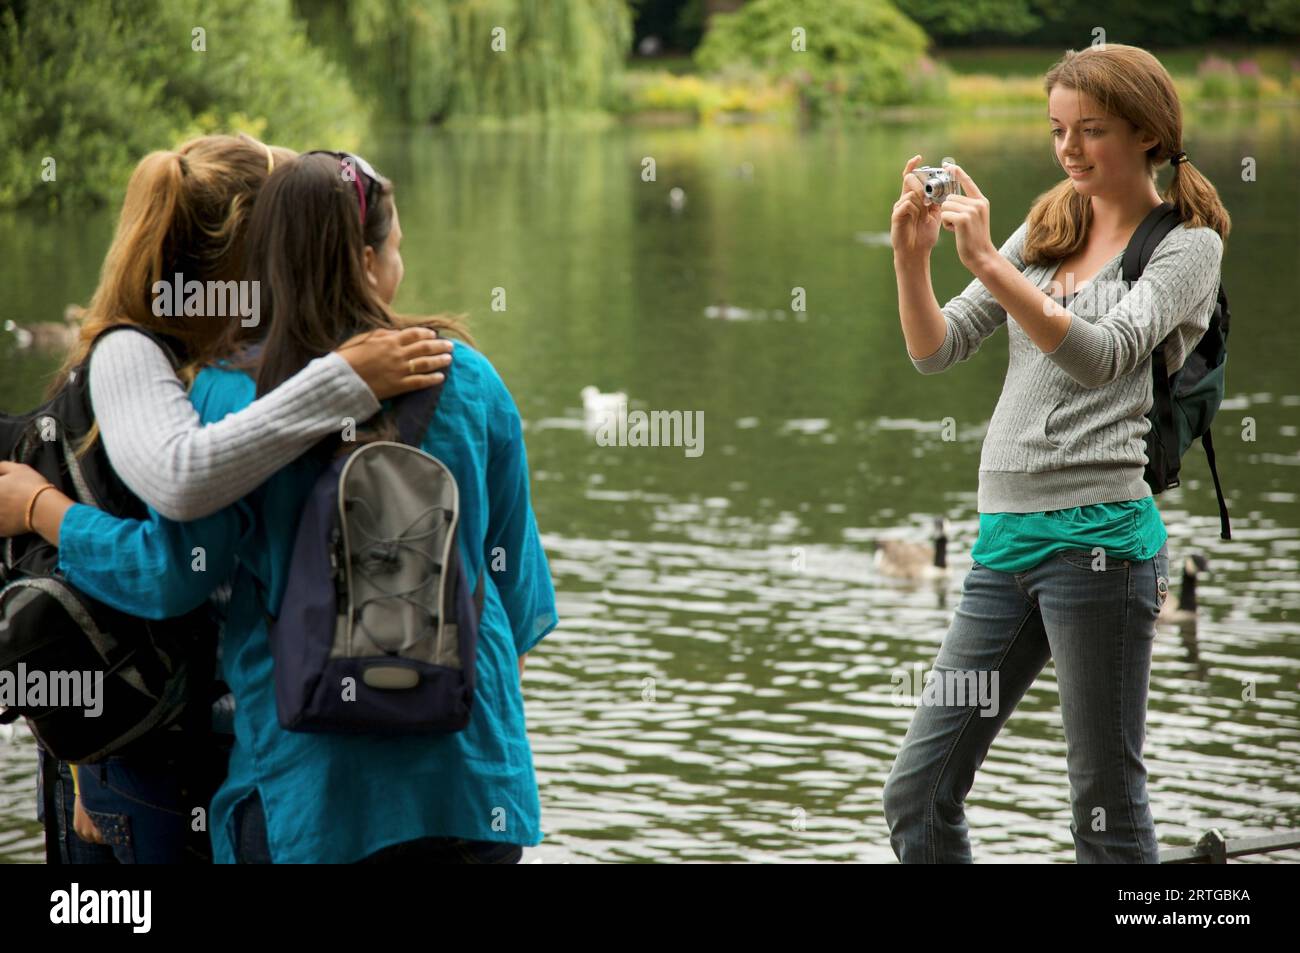 Teenaged girl taking photograph of two women by a lake Stock Photo